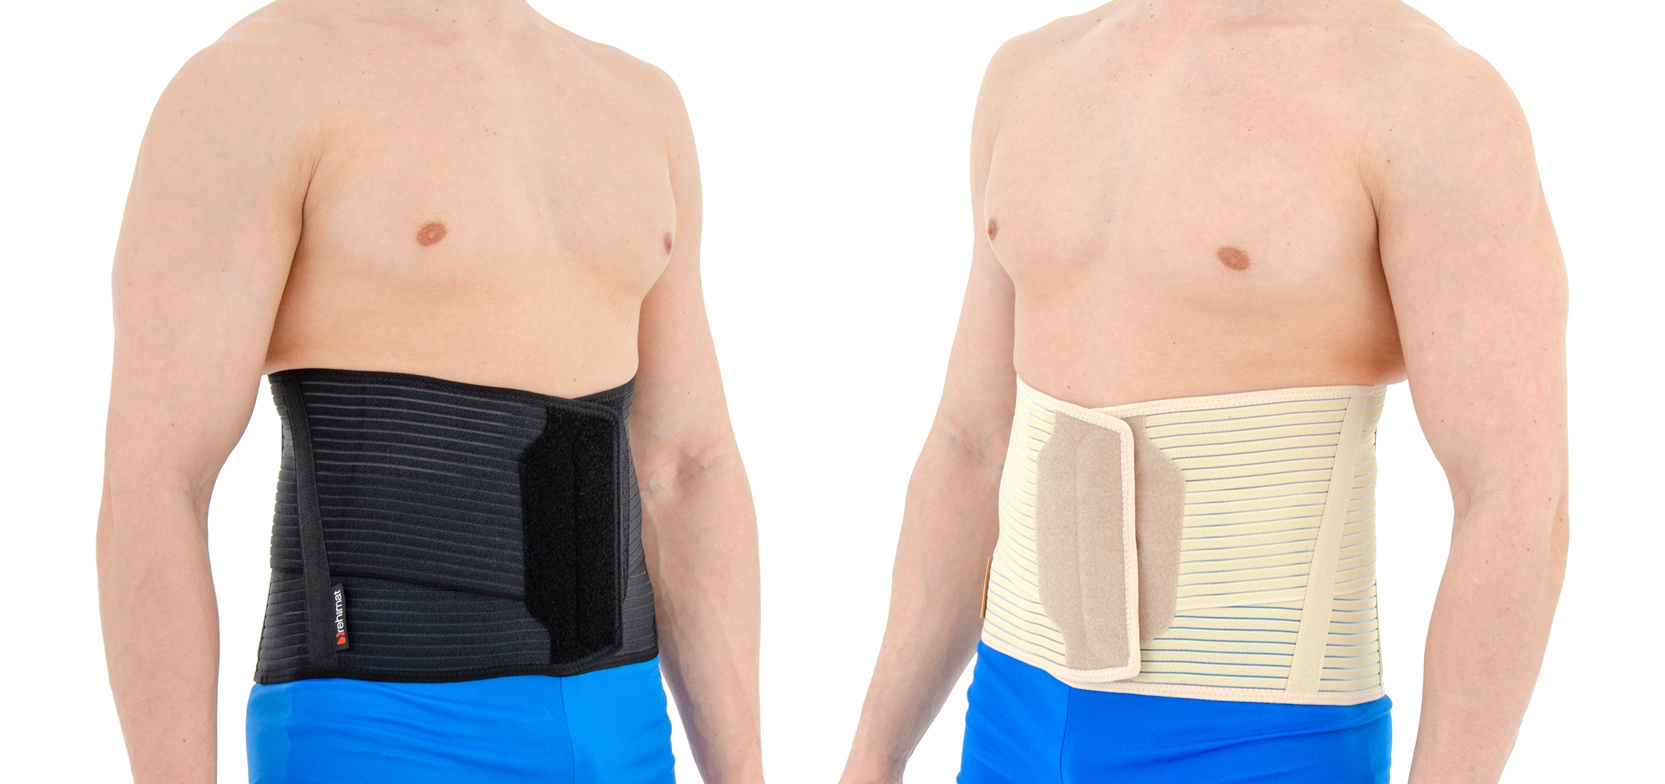 Back brace OT-07 BEIGE  Reh4Mat – lower limb orthosis and braces -  Manufacturer of modern orthopaedic devices